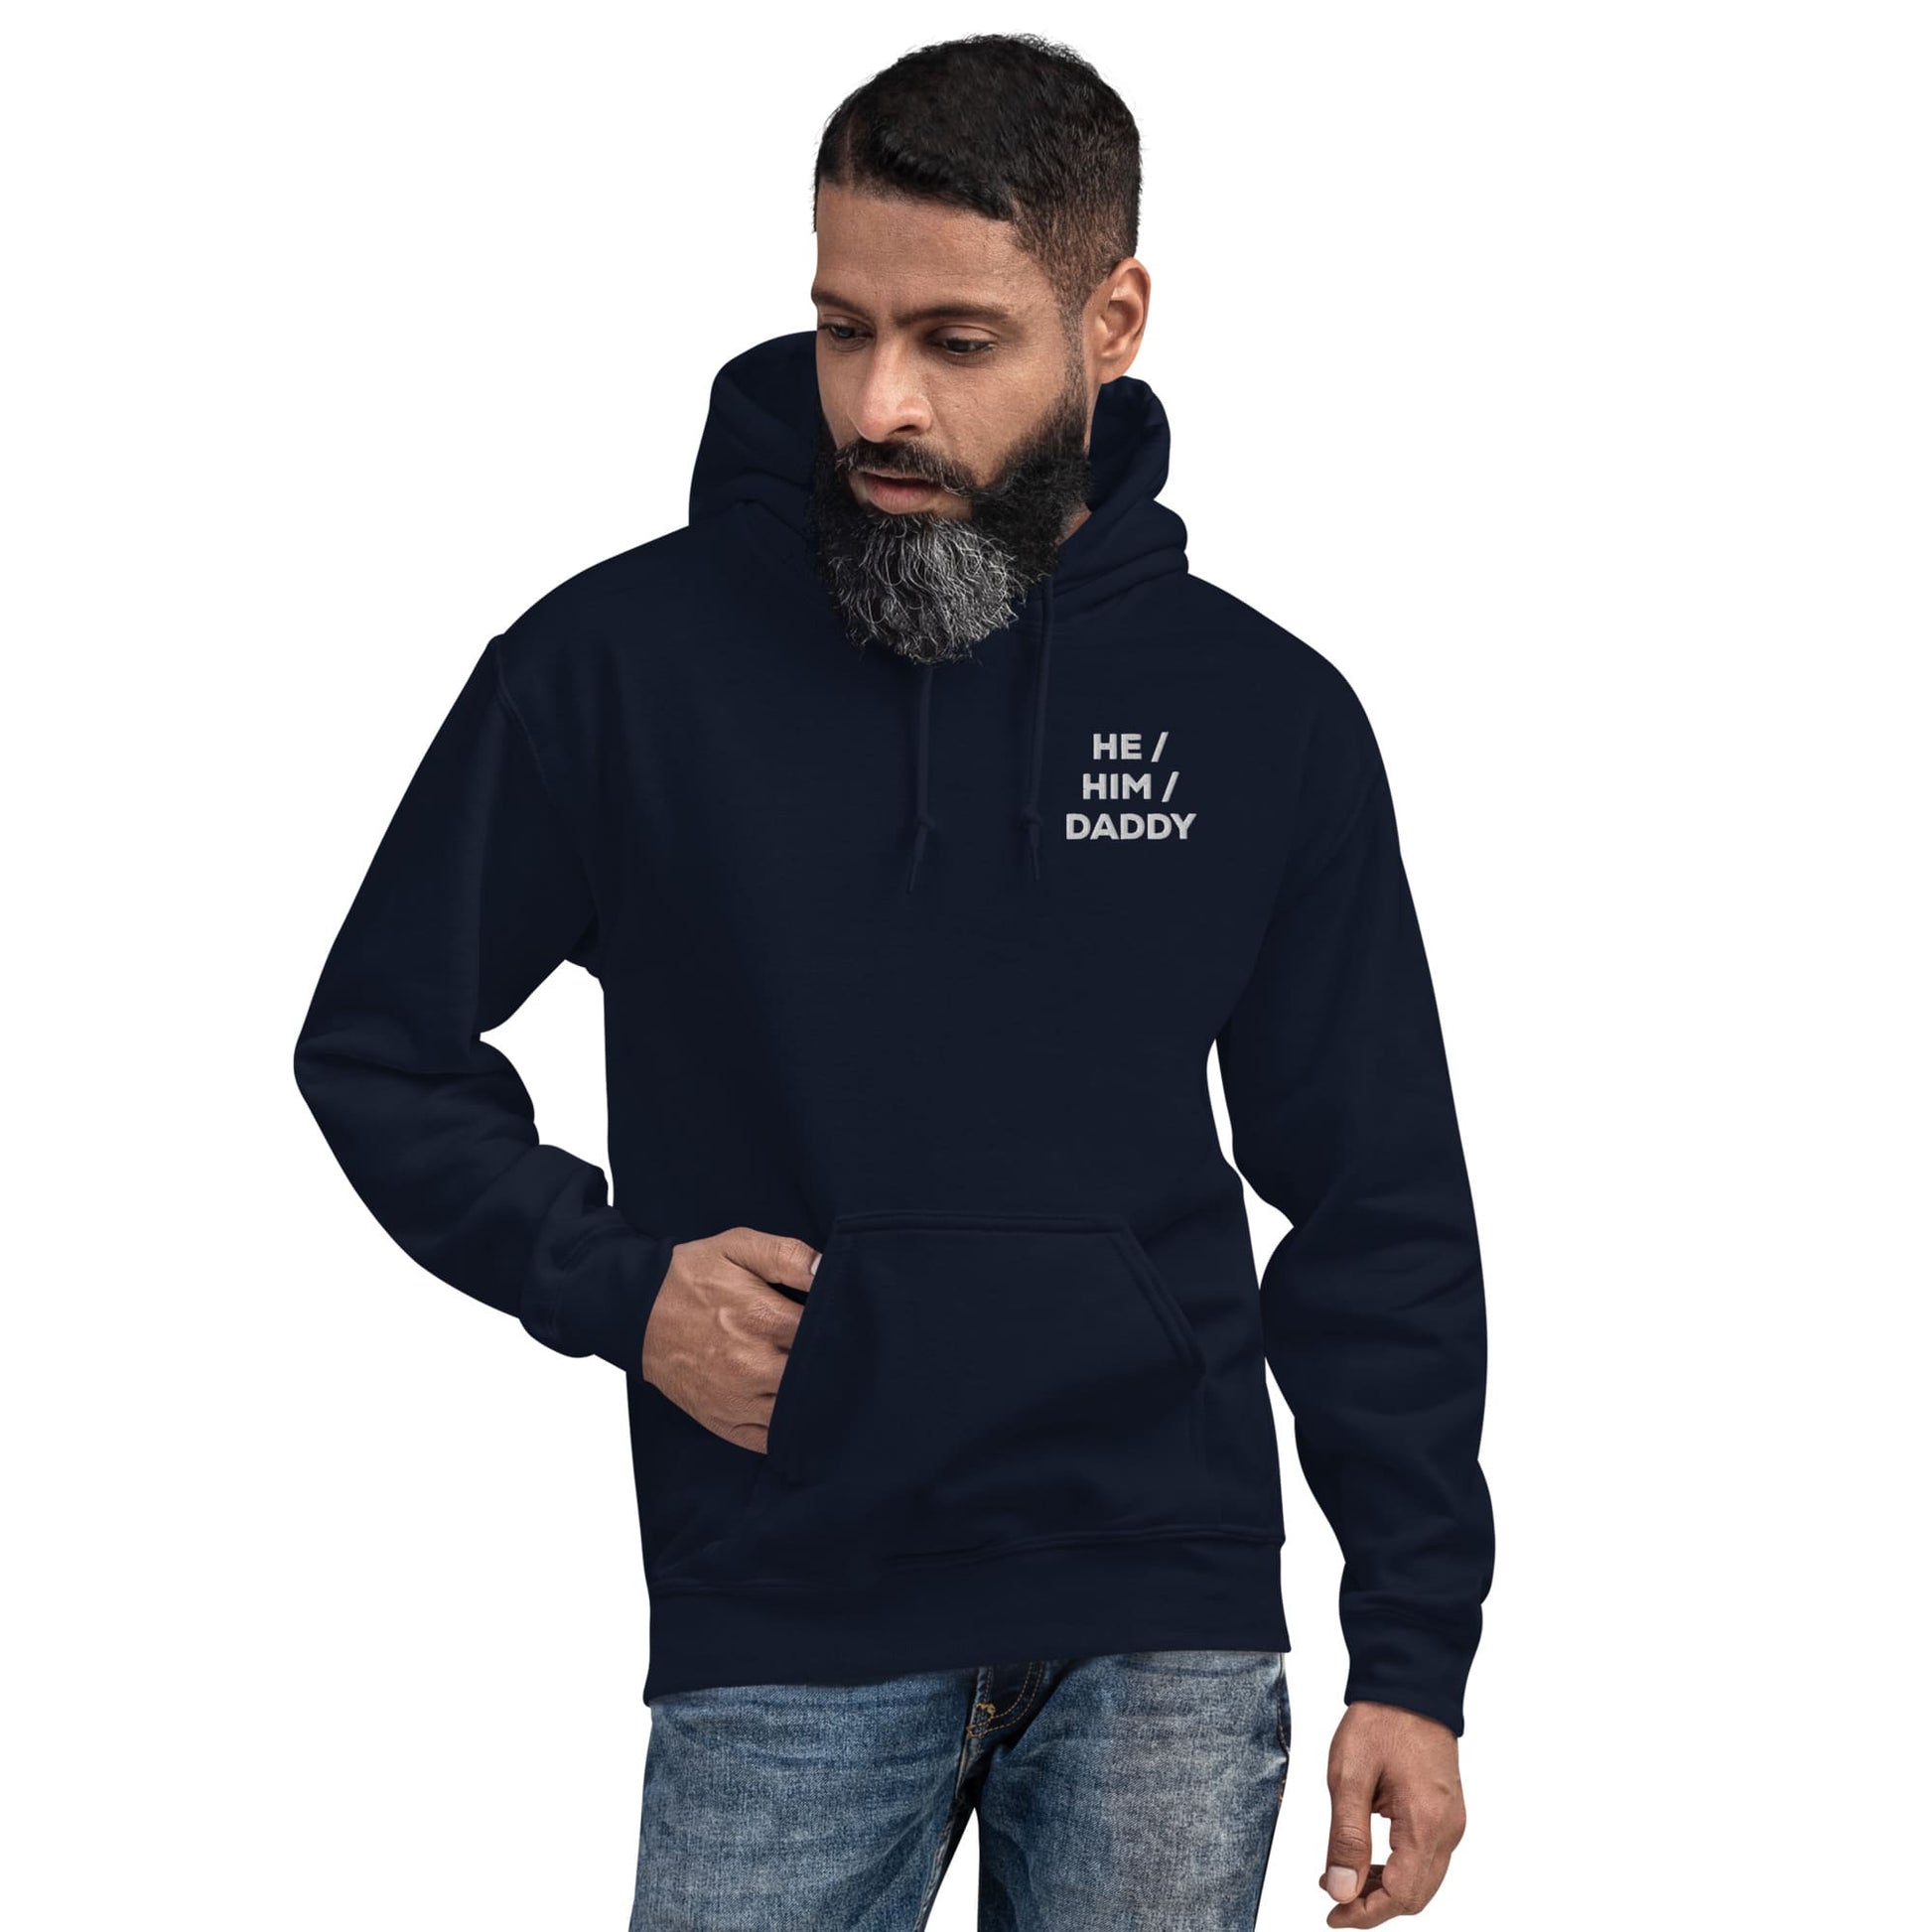 gay daddy hoodie, embroidered he him daddy mlm pronouns pocket design, navy worn by model